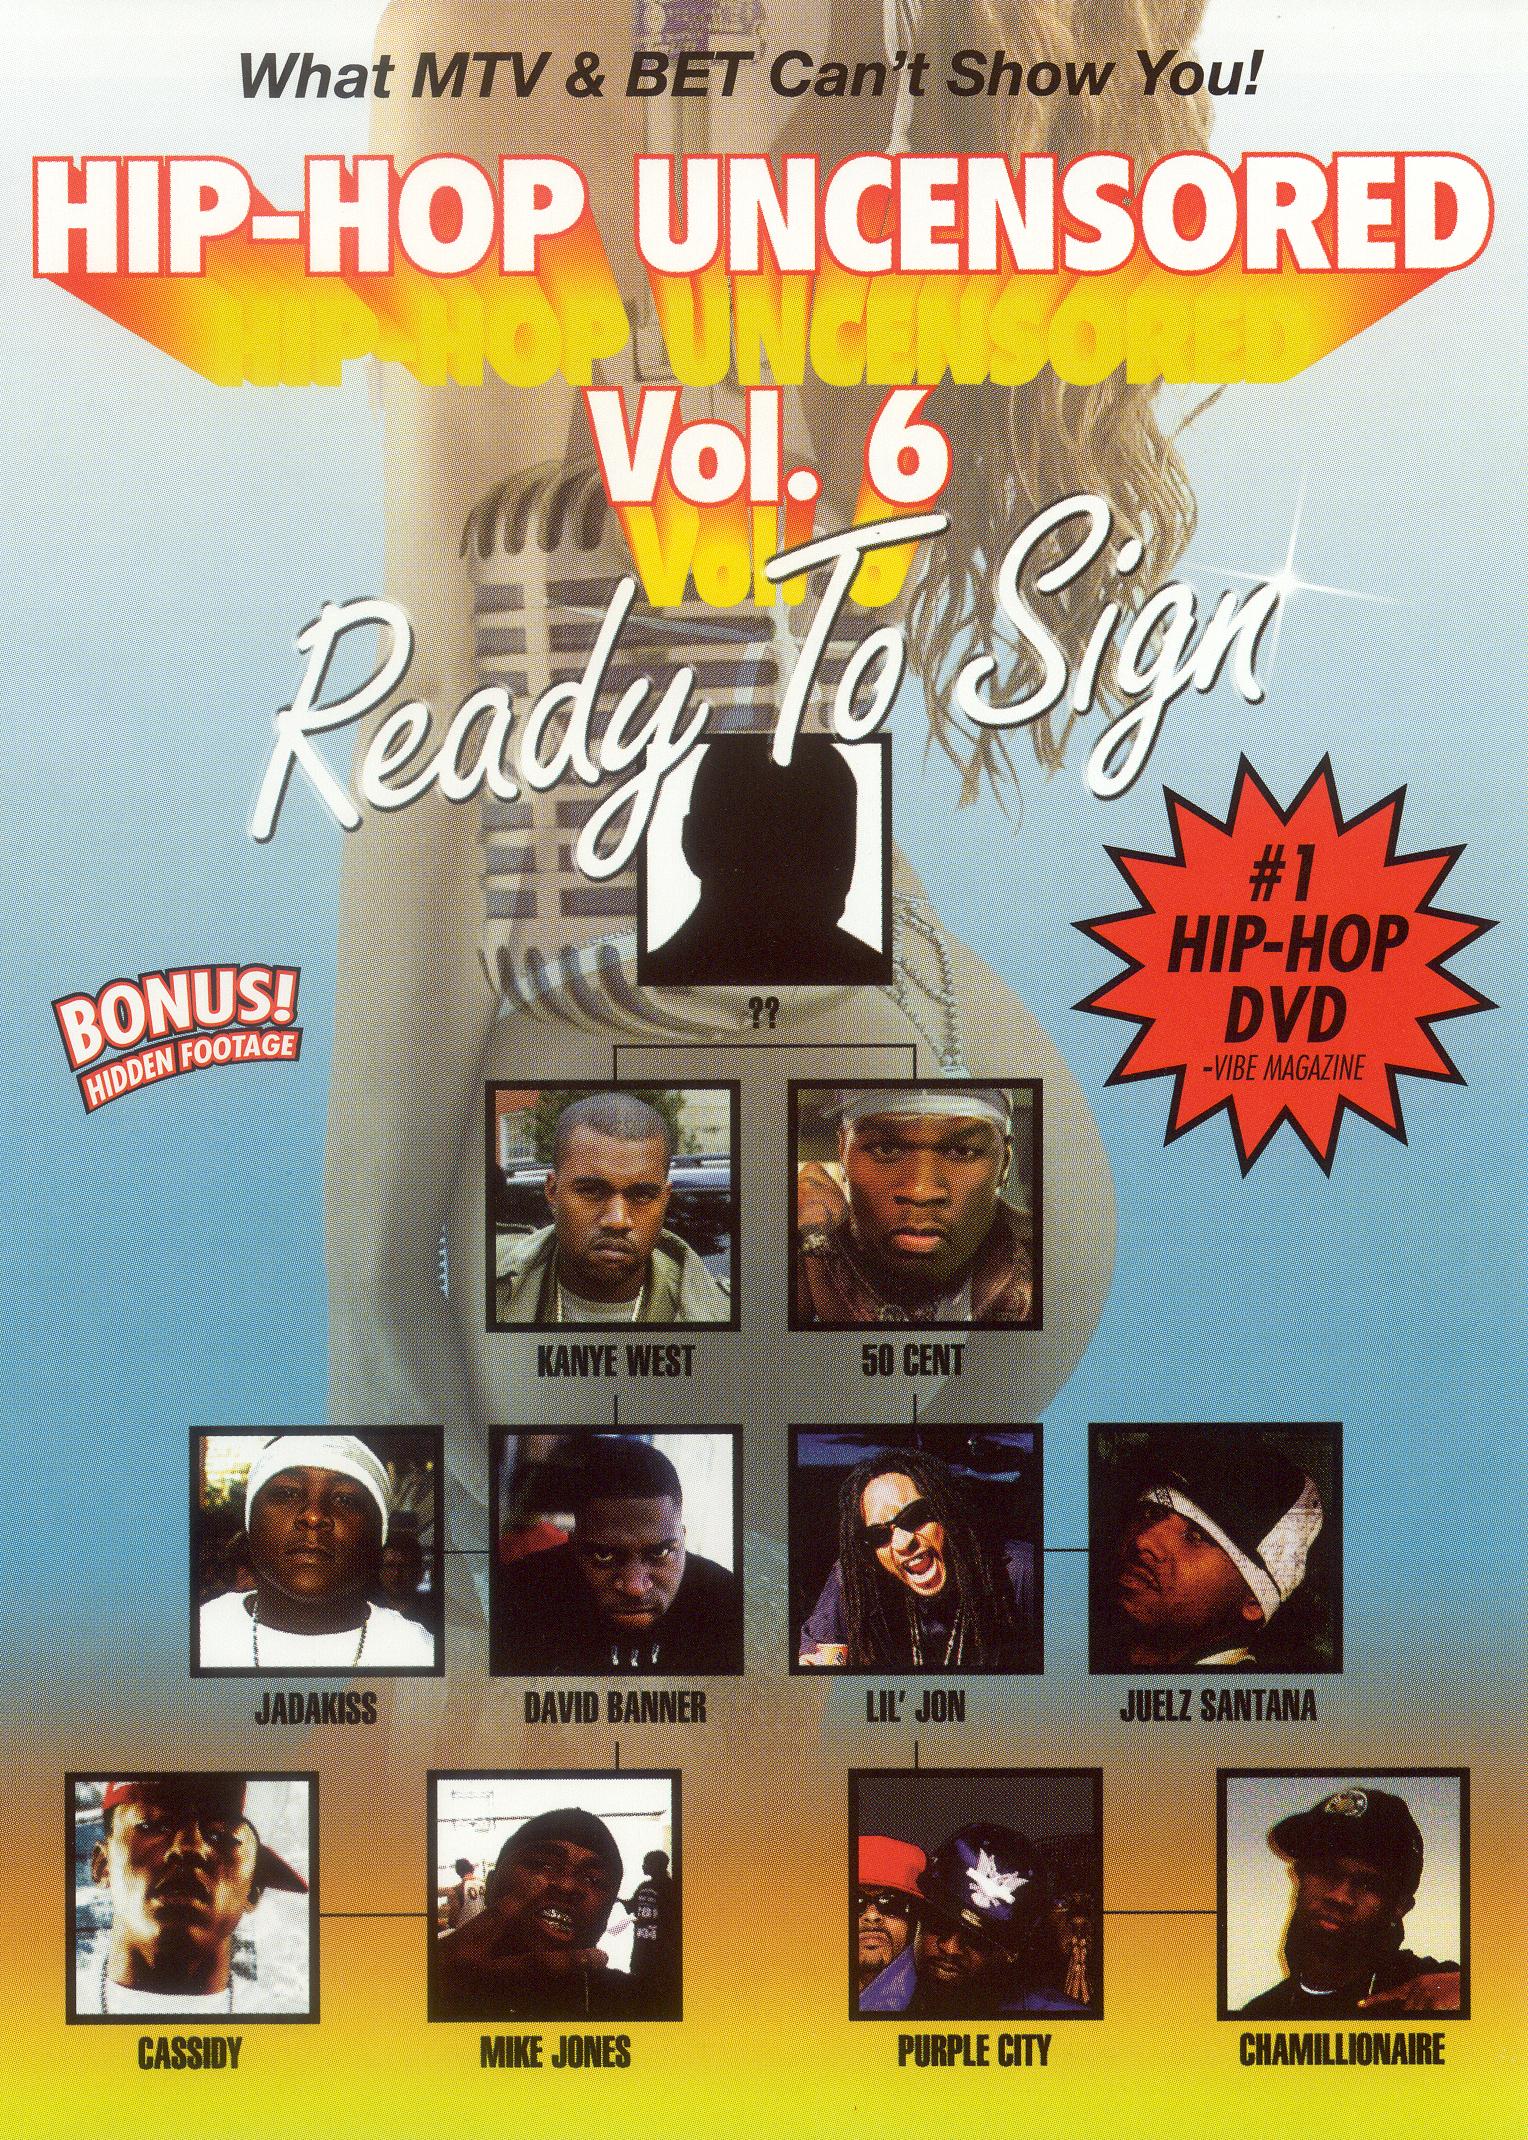 

Hip-Hop Uncensored, Vol. 6: Ready to Sign [DVD] [2005]